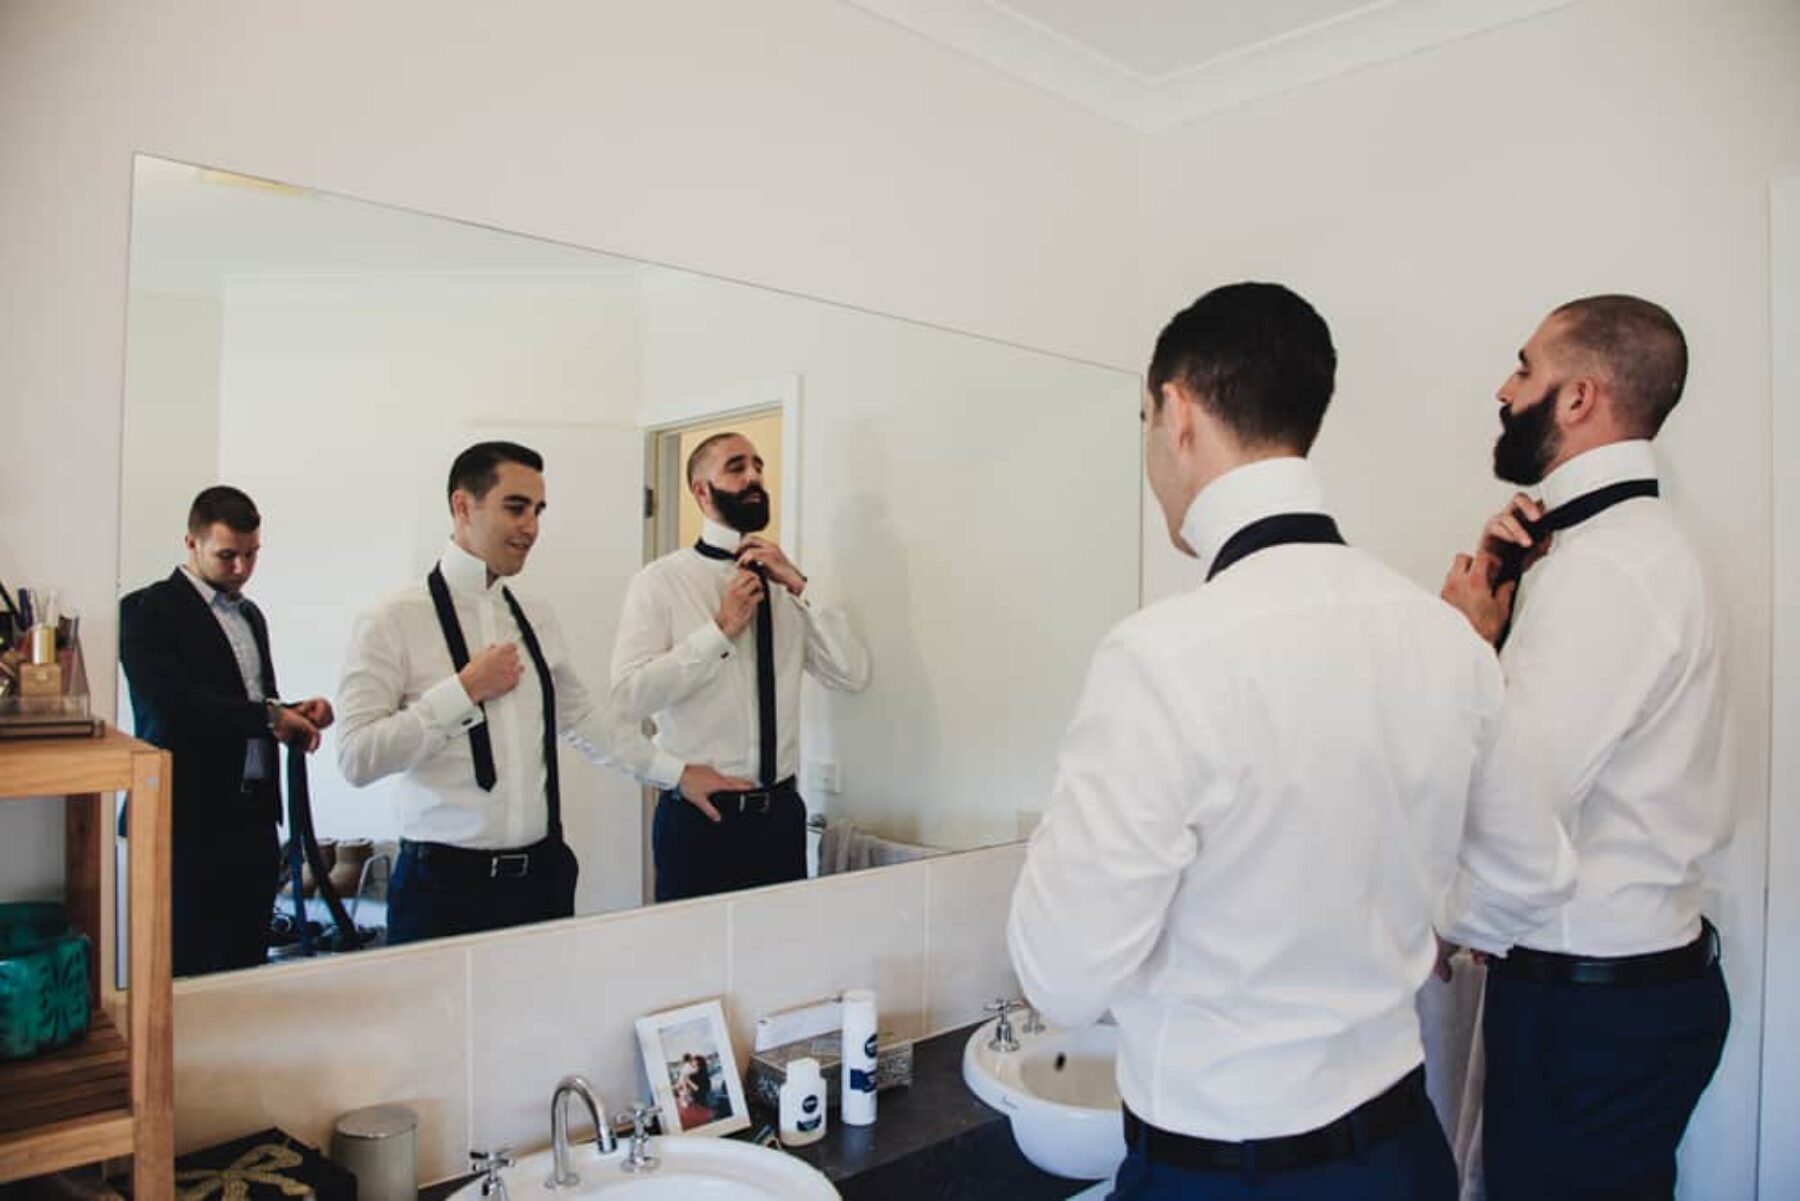 Post Office Hotel wedding - Long Way Home Photography